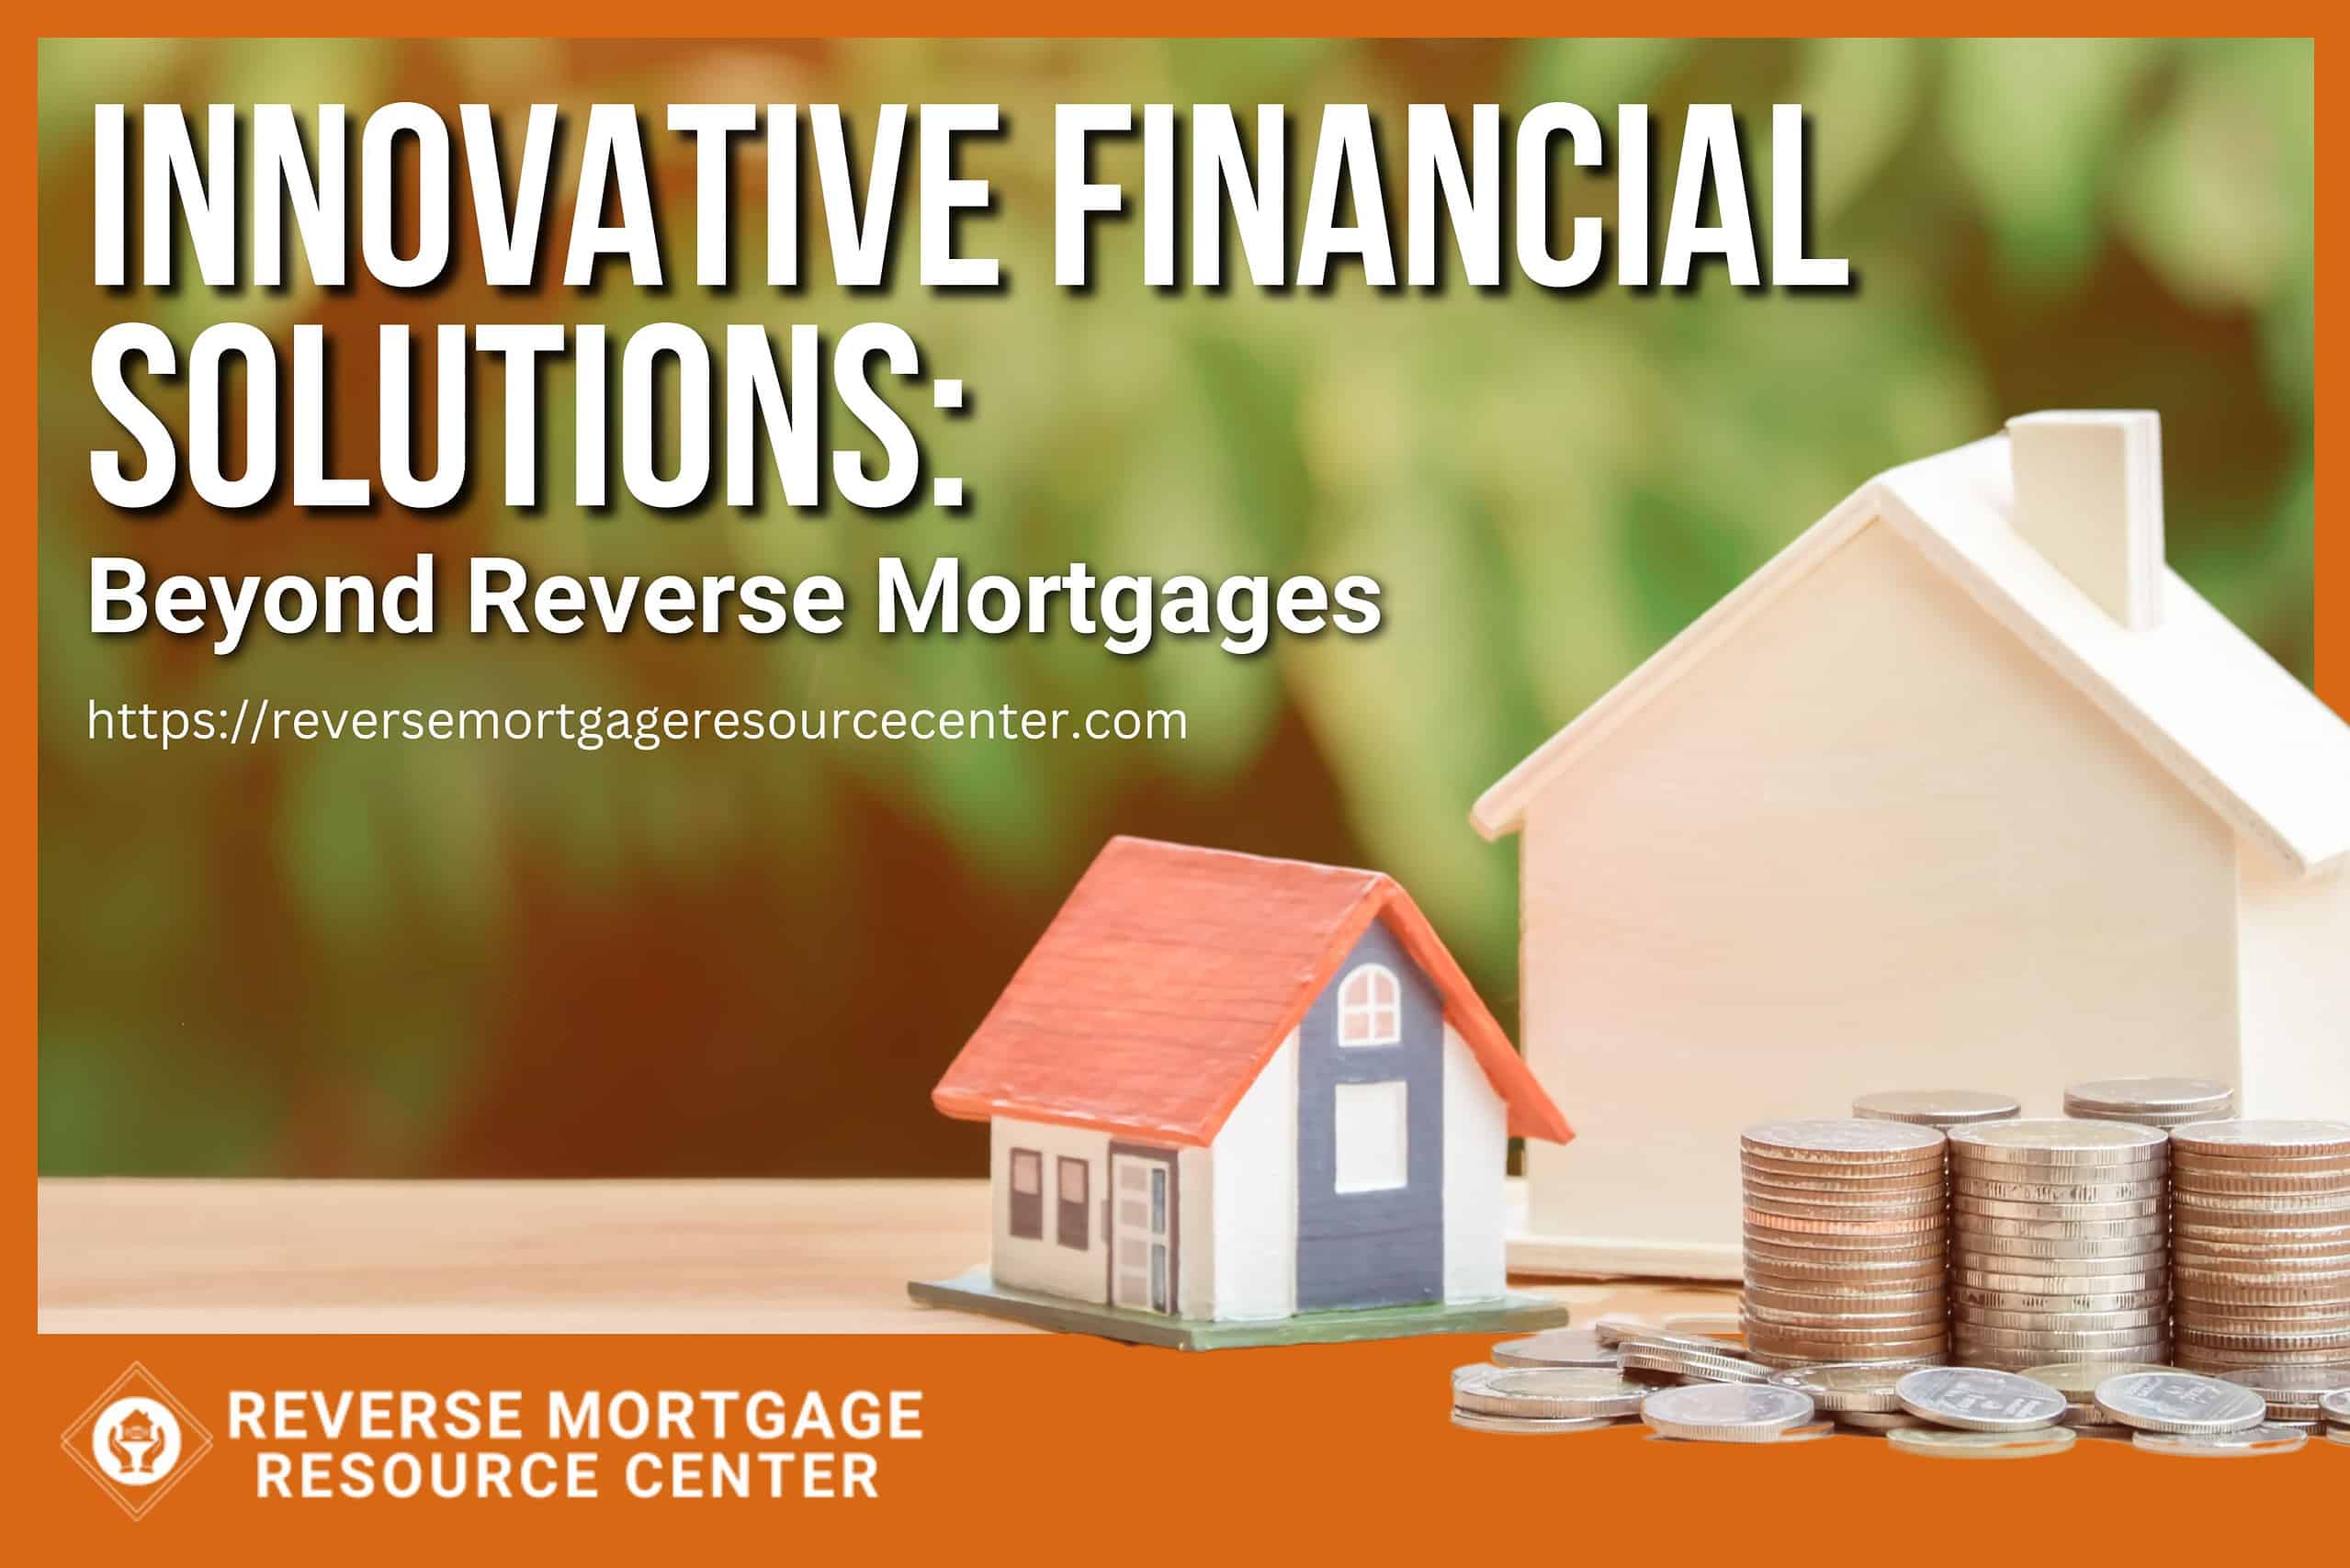 Innovative Financial Solutions Beyond Reverse Mortgages